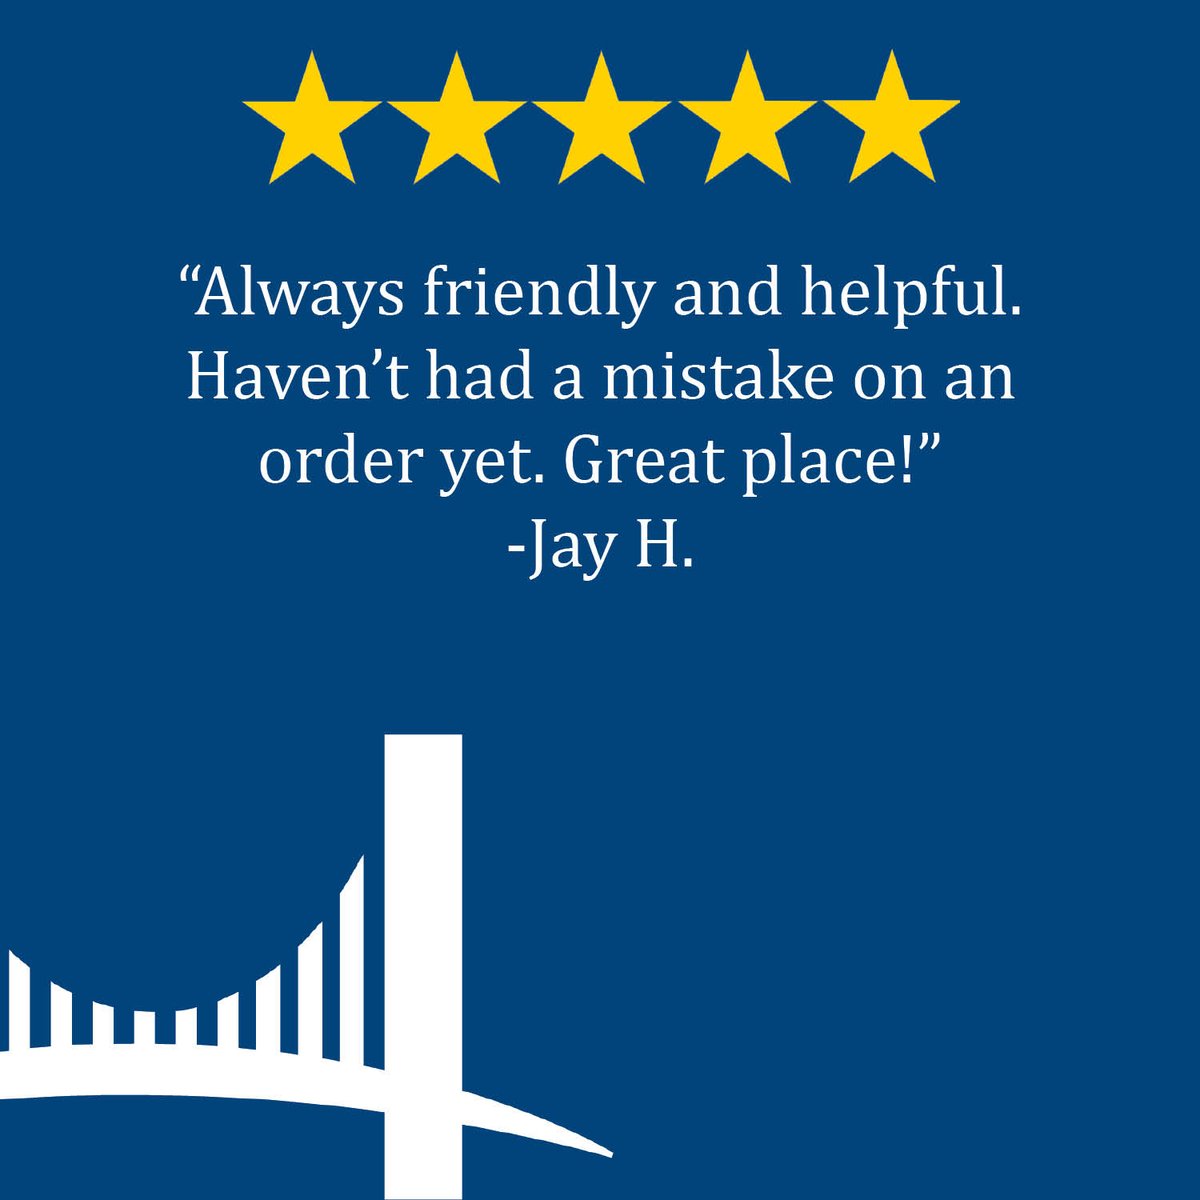 Another 5 star review! Way to go GGVCP Team. And thank you, Jay, for taking the time to tell us (and others) about your experience.

#goldengatevcp #ggvcp #petmeds #vetmeds #veterinarycompounding #compoundingpharmacy #petpharmacy  #veterinarycare #petcare #pethacks #animalcare